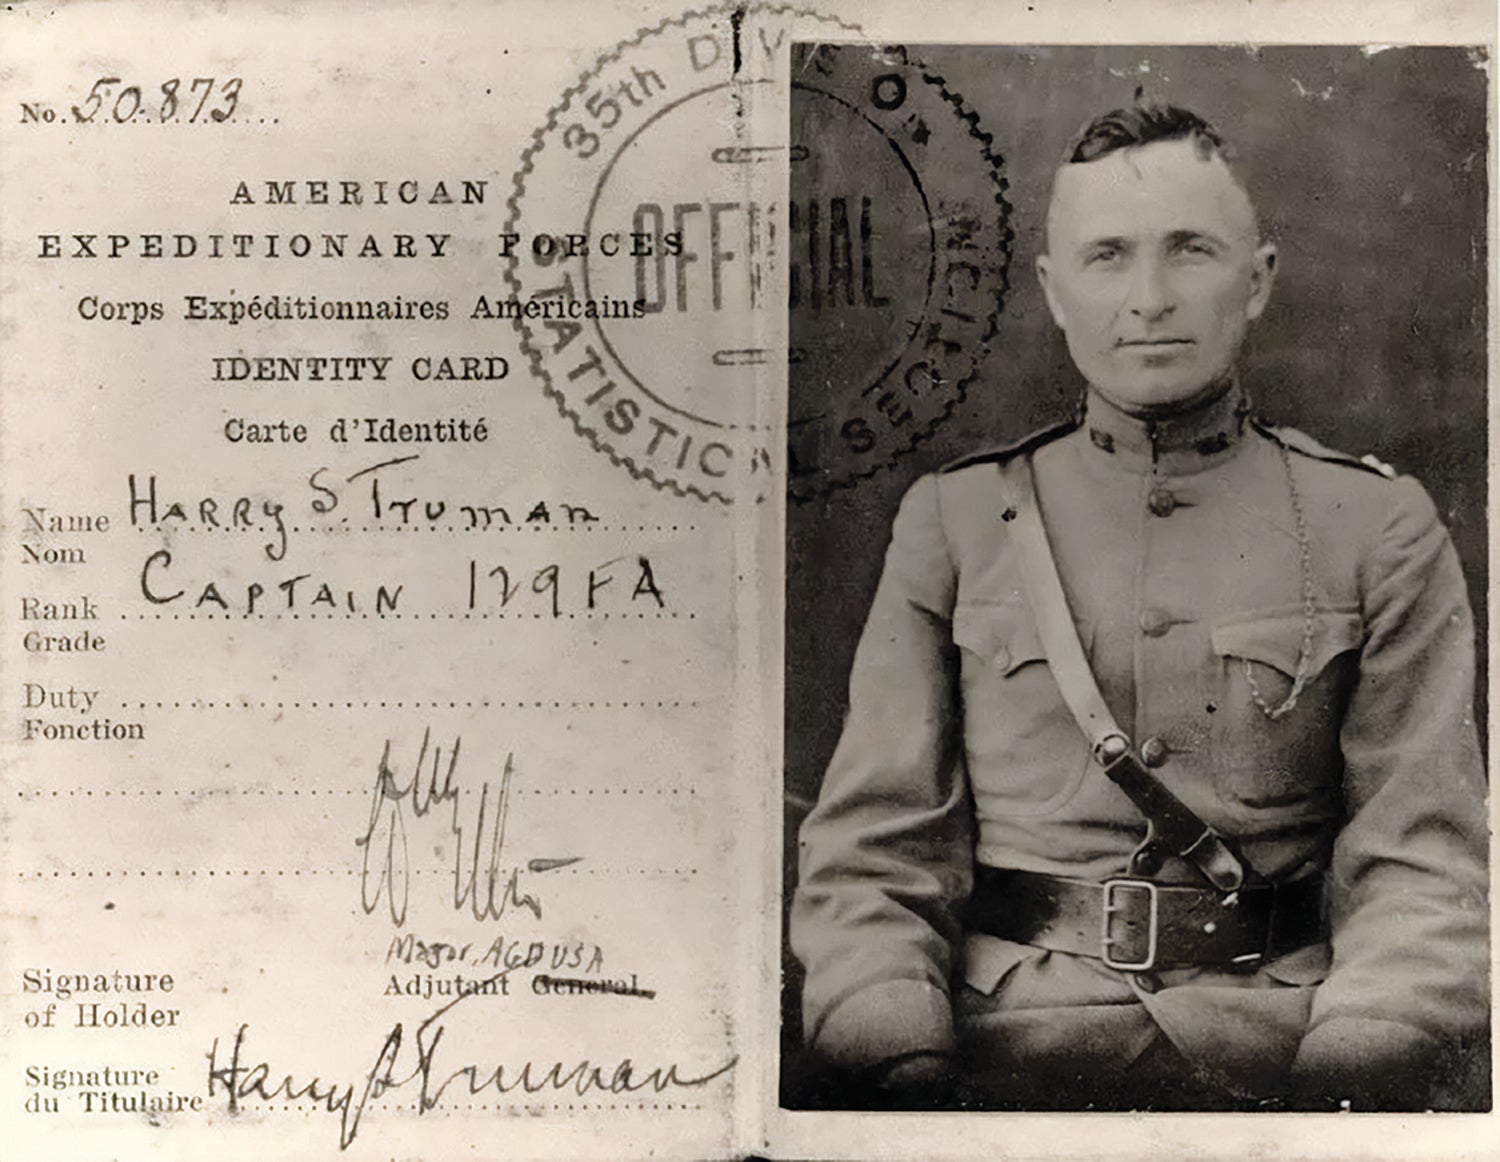 Truman’s American Expeditionary Forces ID card circa World War I. (Credit: National Park Service)